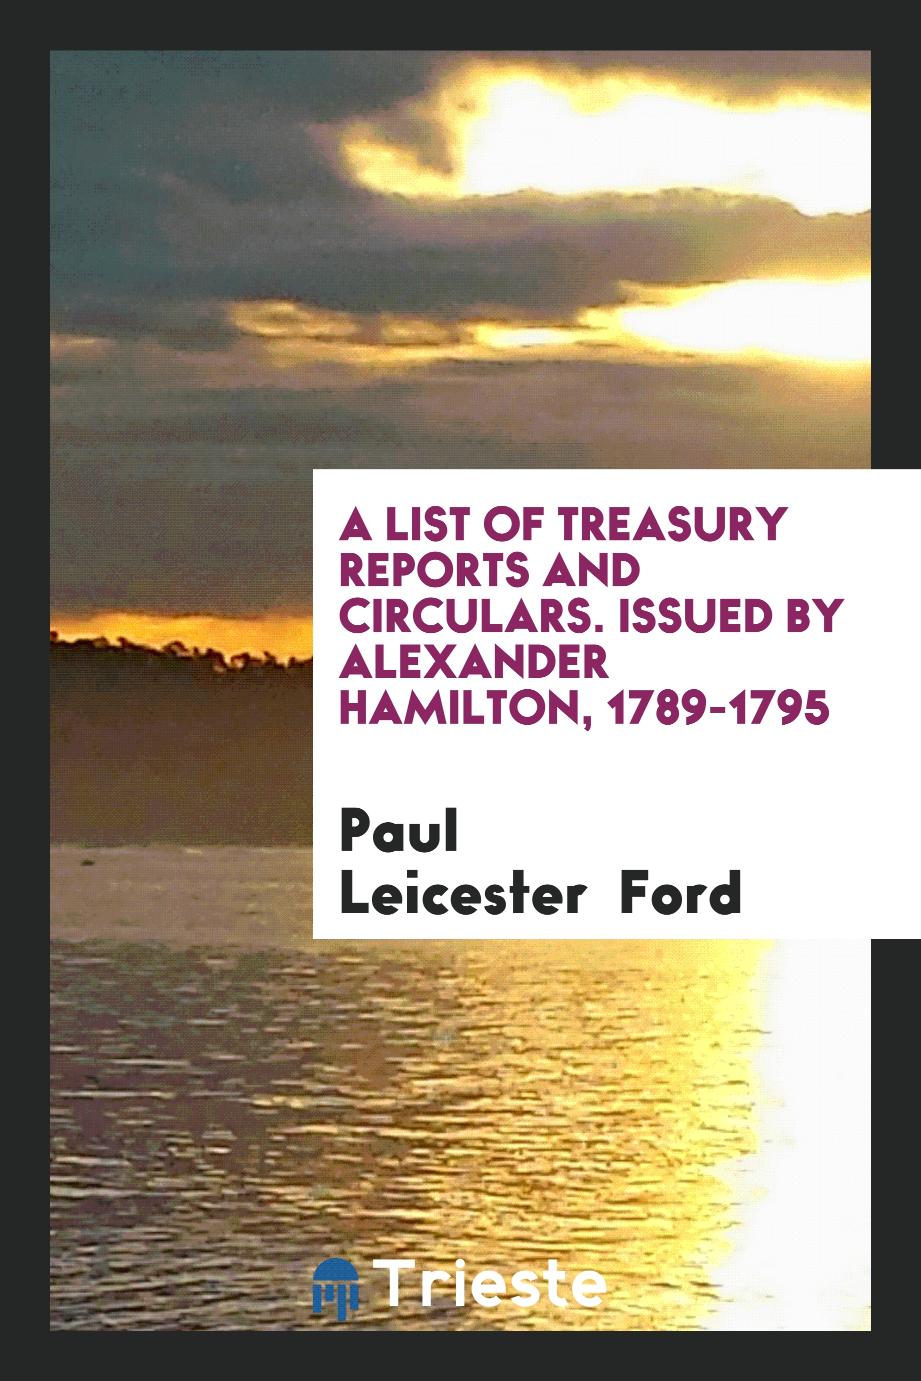 A List of Treasury Reports and Circulars. Issued by Alexander Hamilton, 1789-1795